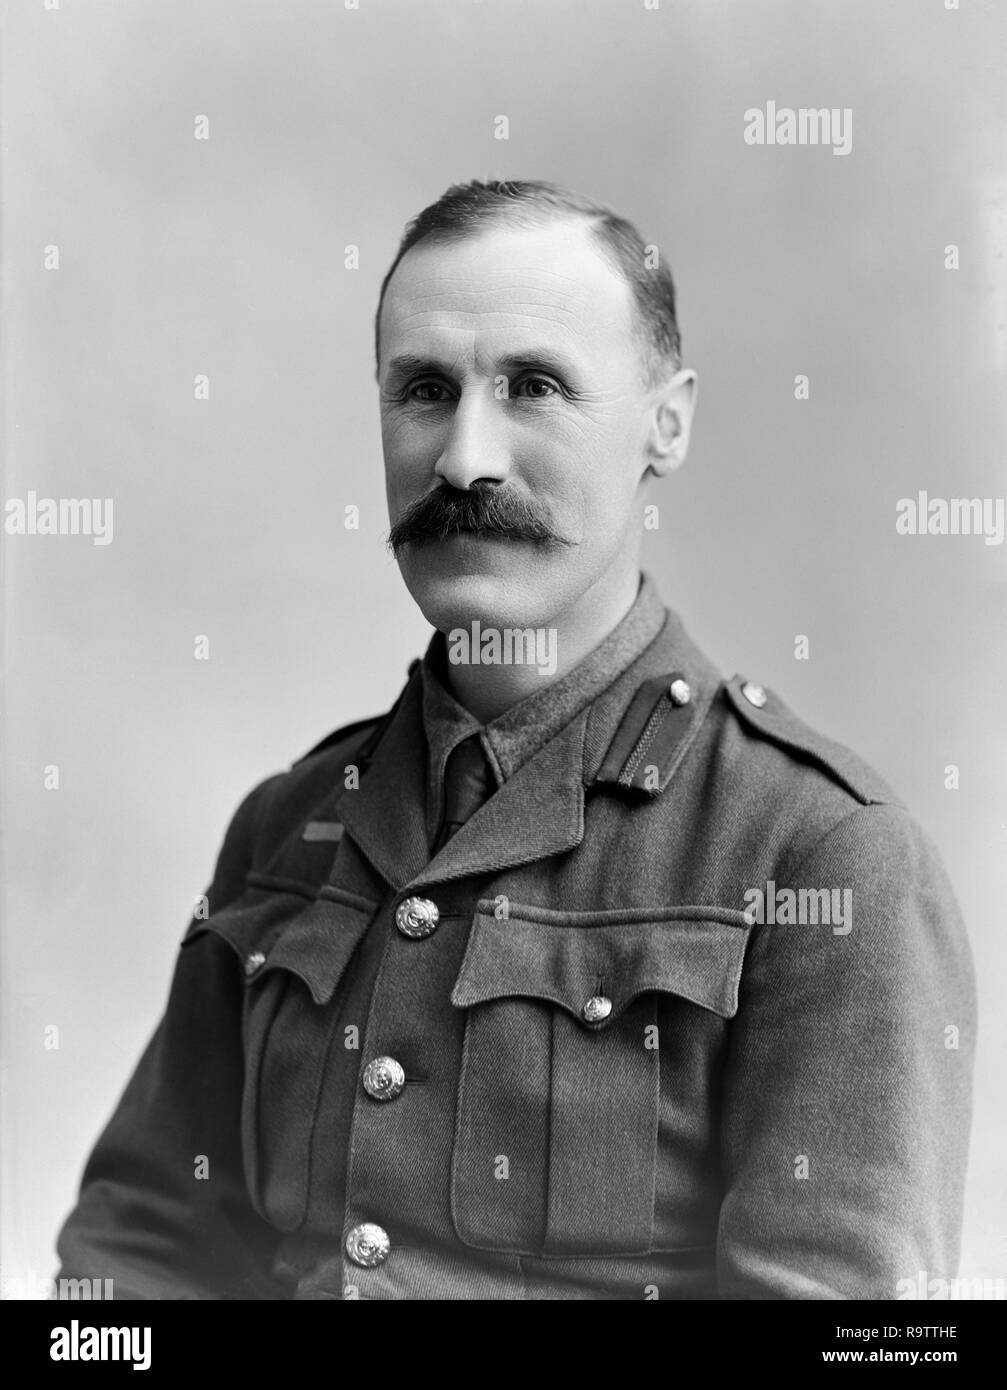 Lieutenant Colonel Harry Douglas Farquharson of the Royal Marines Light Infantry, a regiment of the British Army. Photograph taken on 16th March 1915 at the famous London Photographic Studios of Bassano. Stock Photo